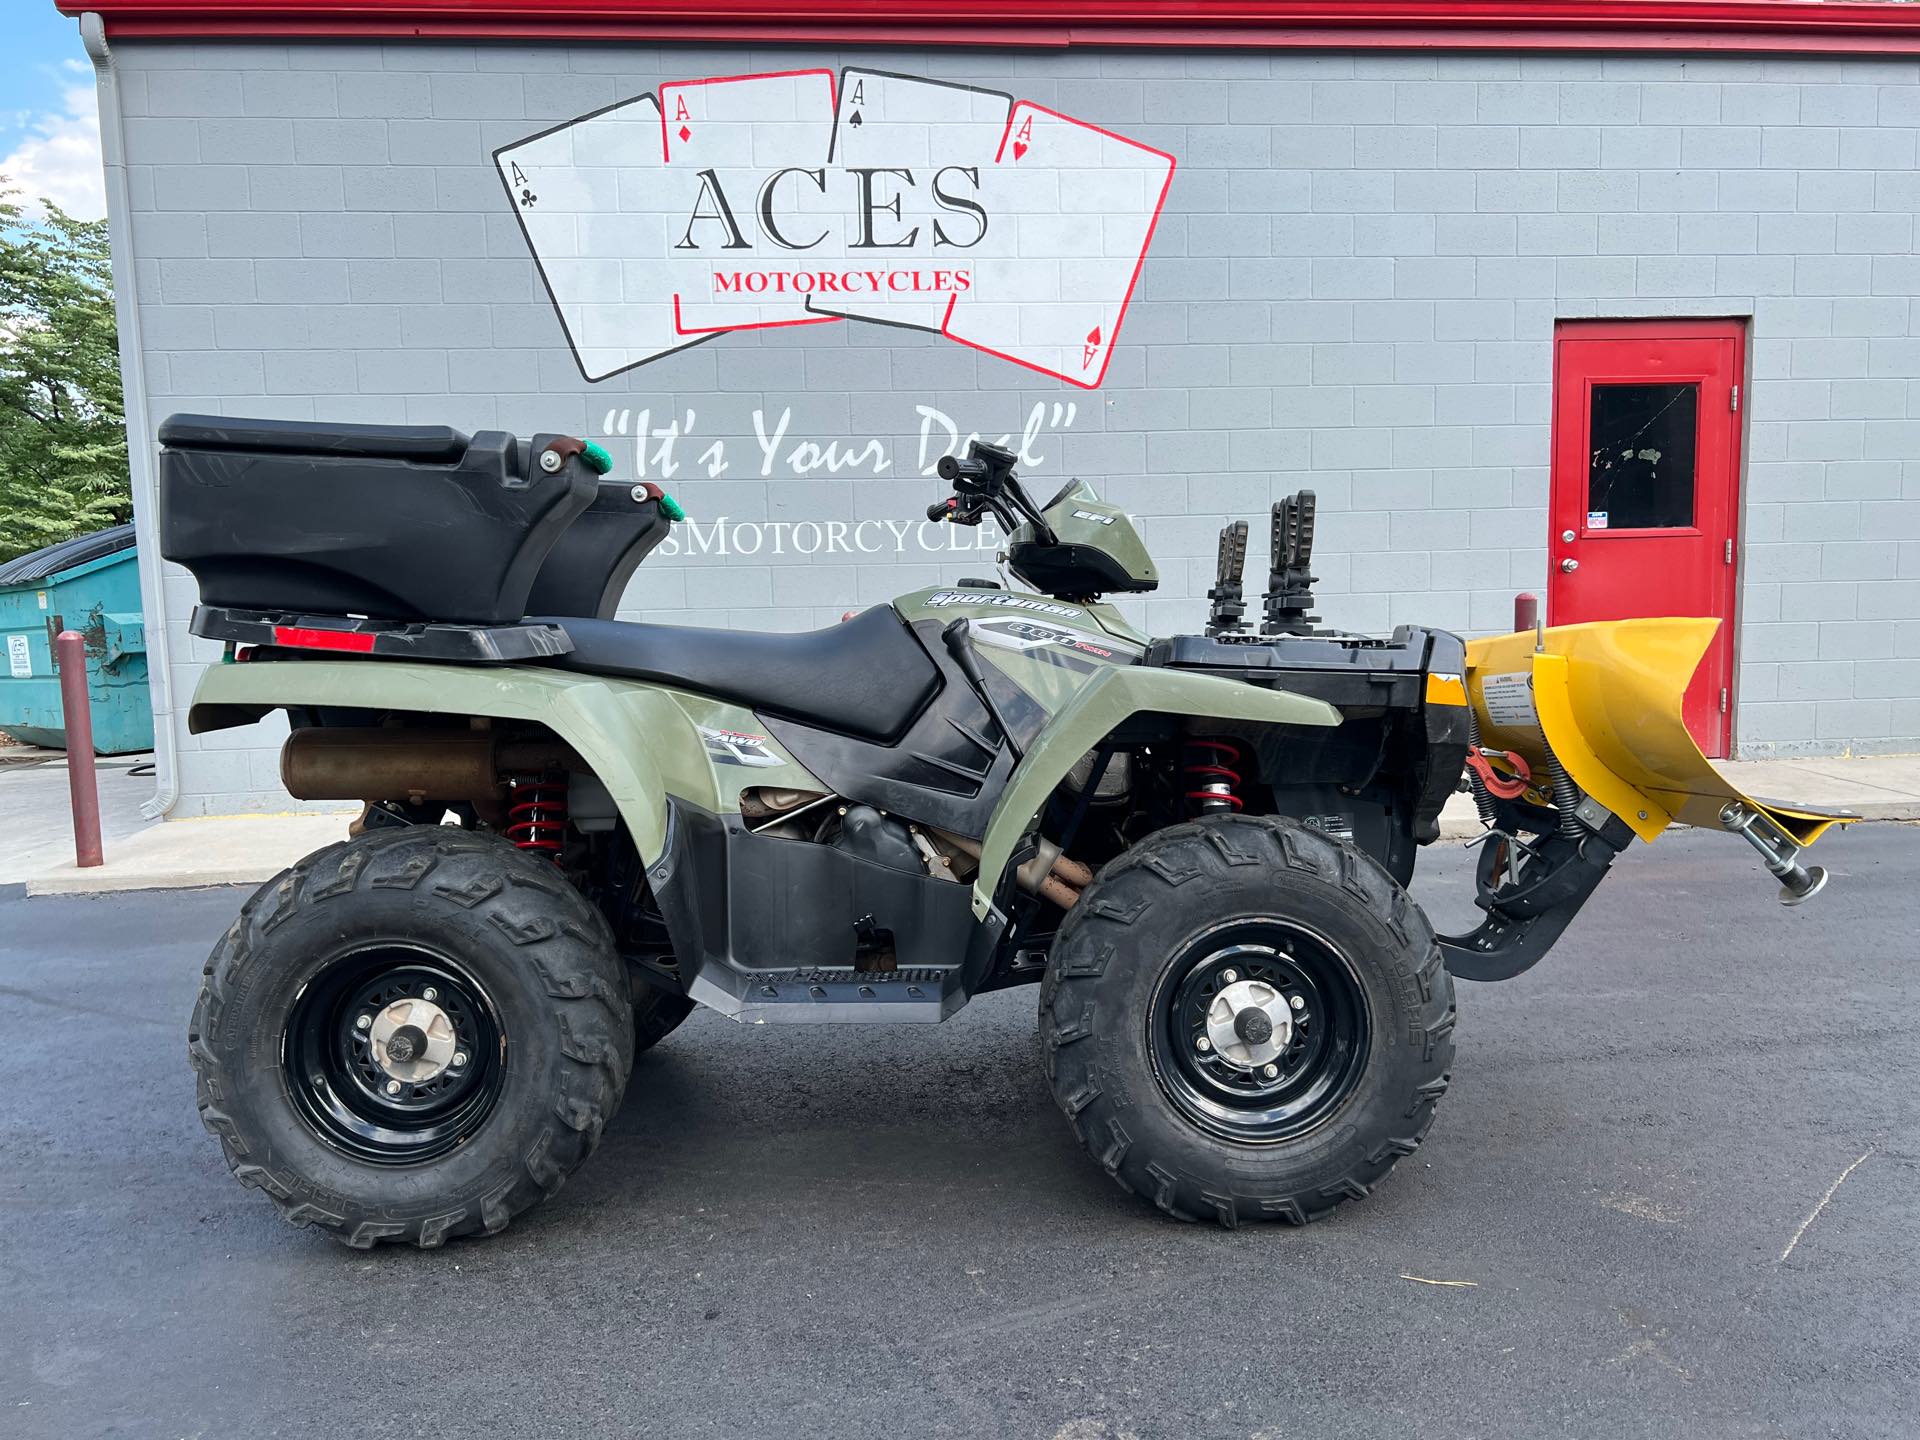 2006 Polaris Sportsman 800 Twin EFI at Aces Motorcycles - Fort Collins